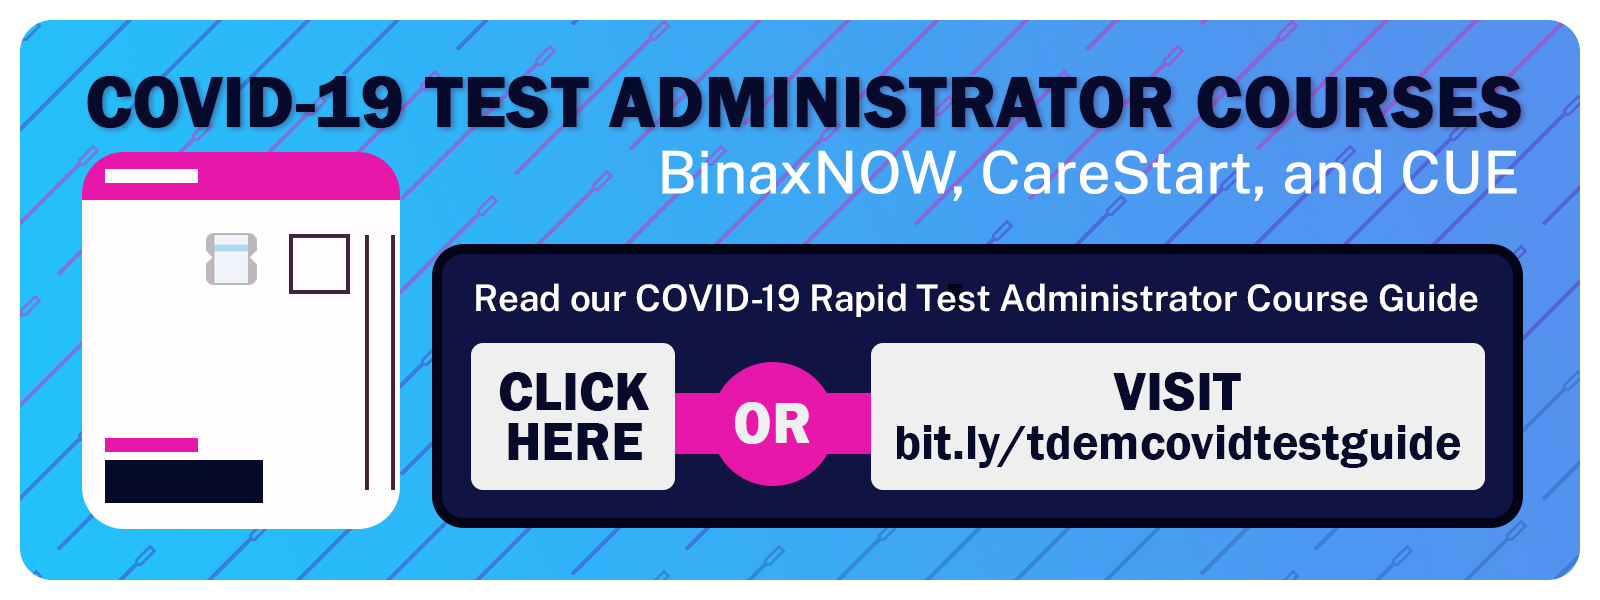 Find our rapid test guide at bit.ly/tdemcovidtestguide